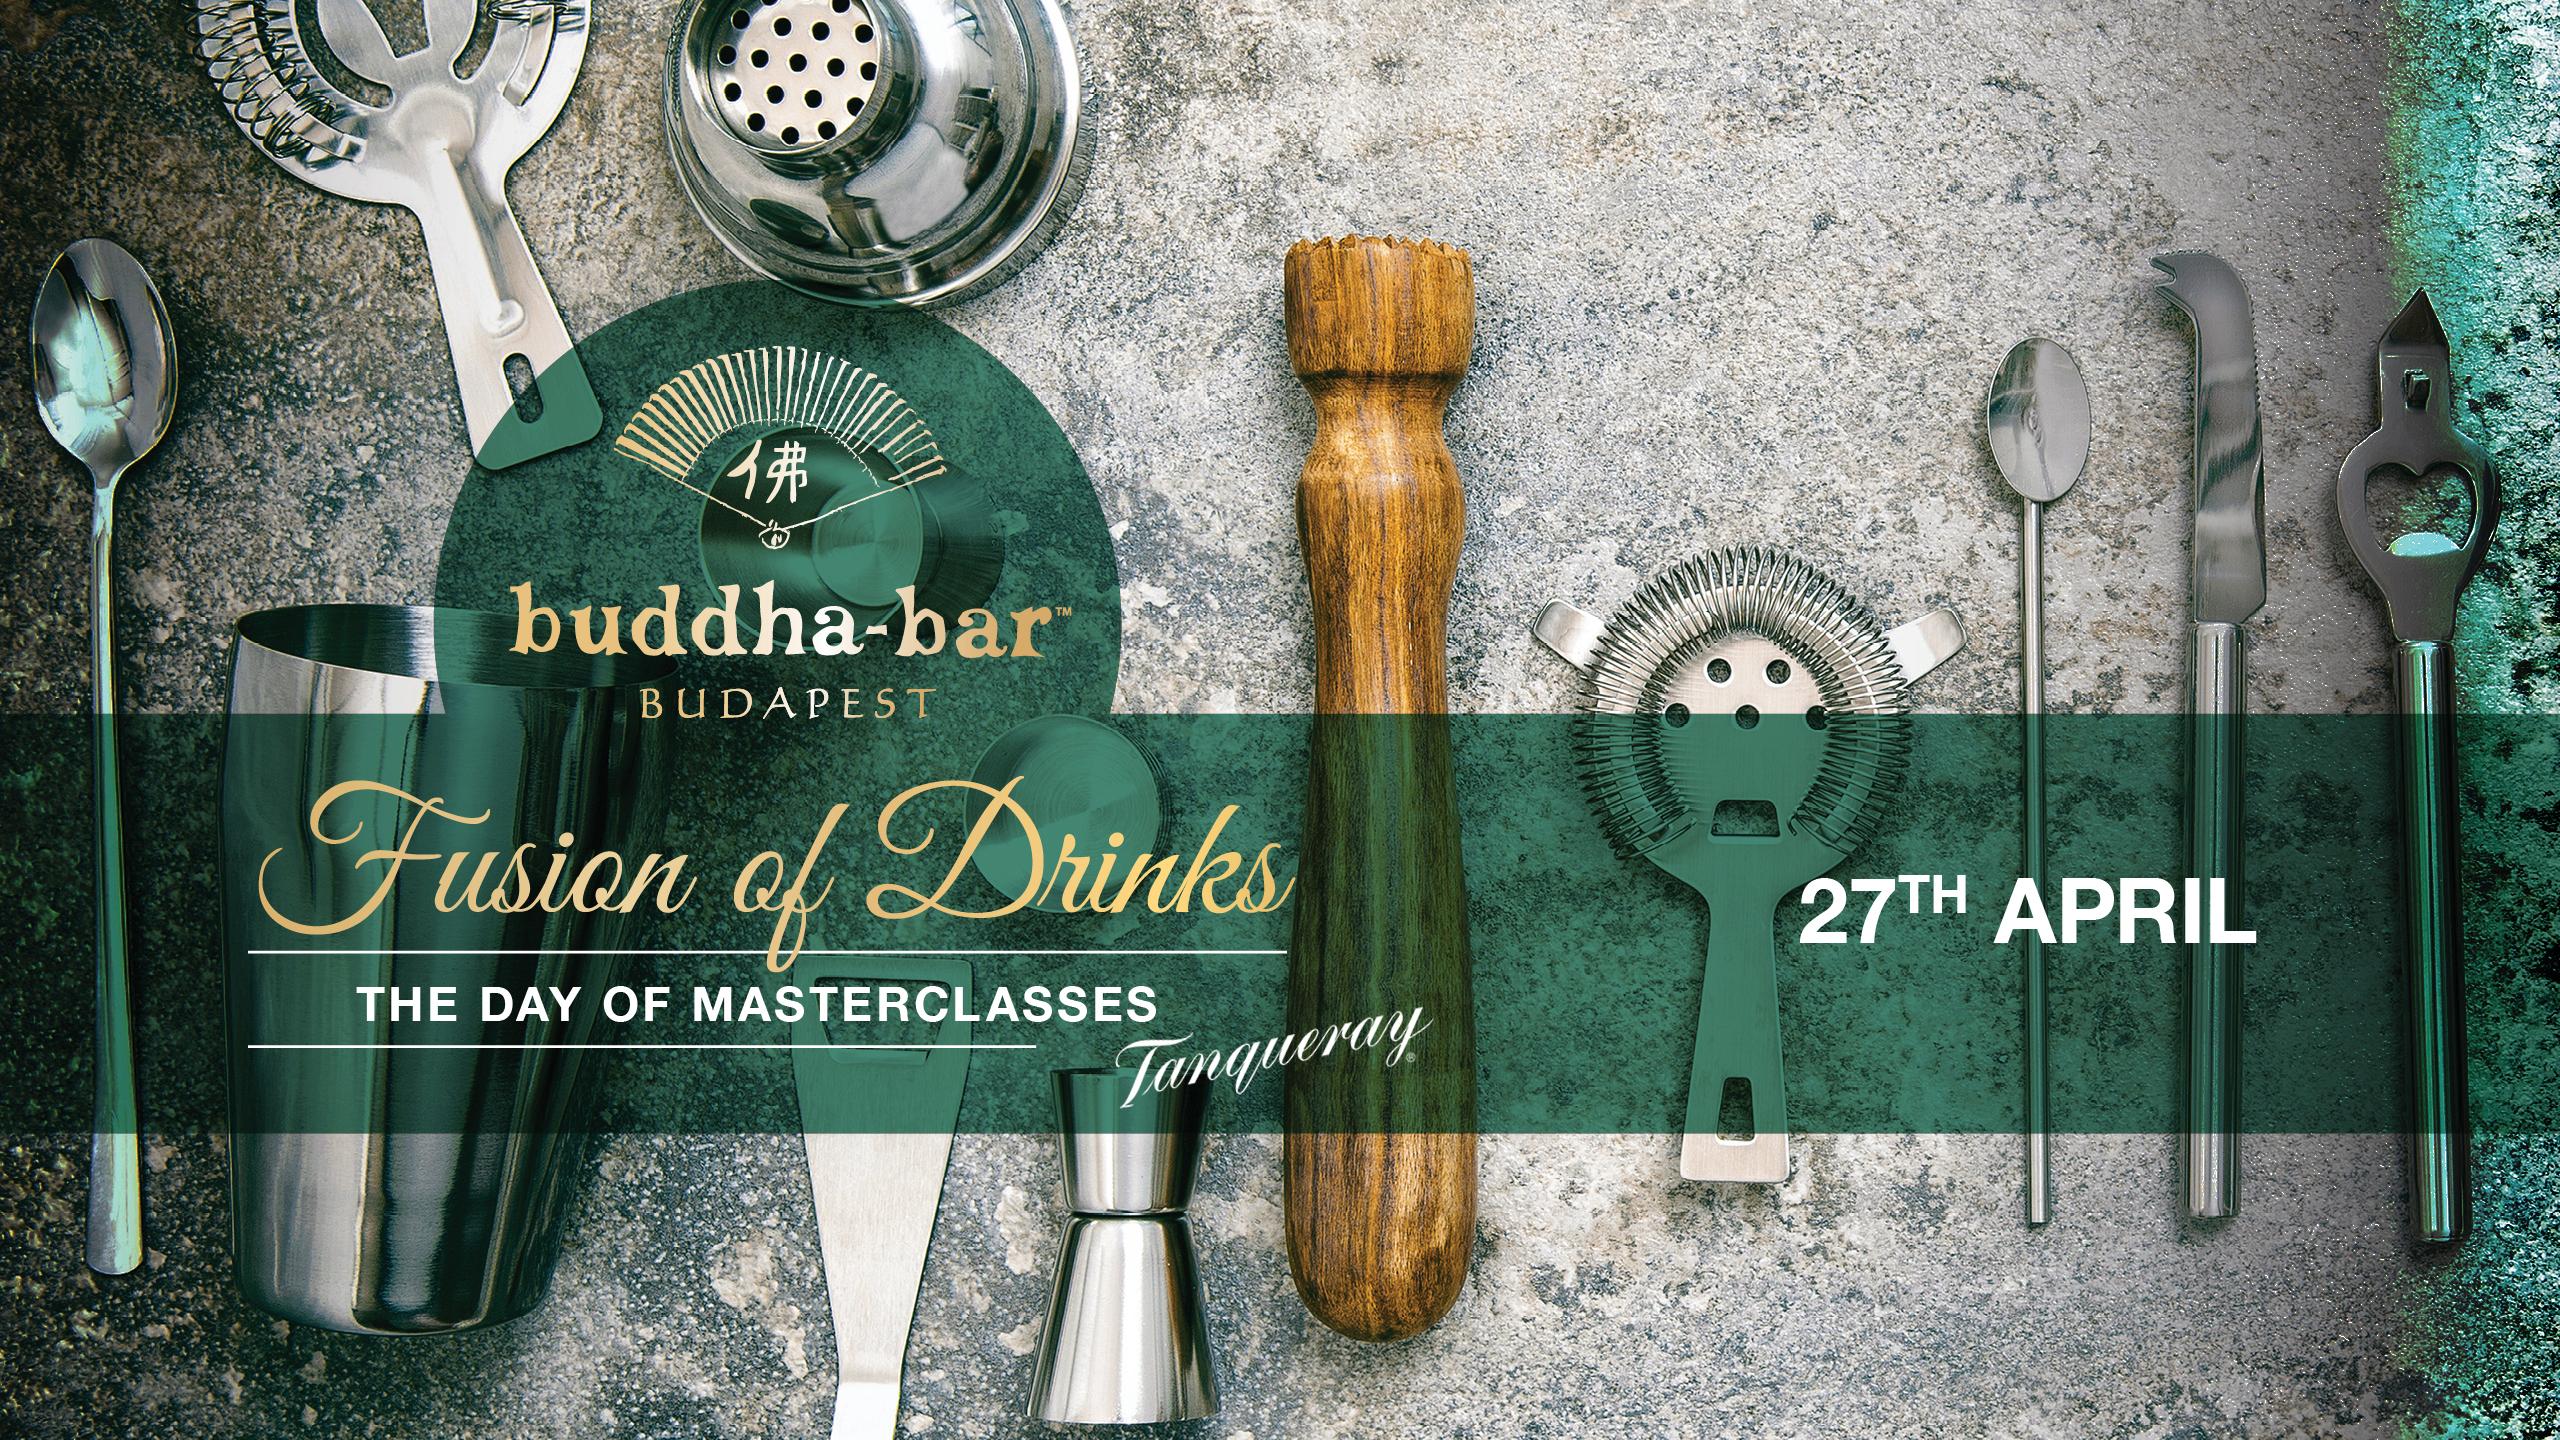 Fusion Of Drinks - The Day Of Masterclasses, Buddha-Bar, 27 April